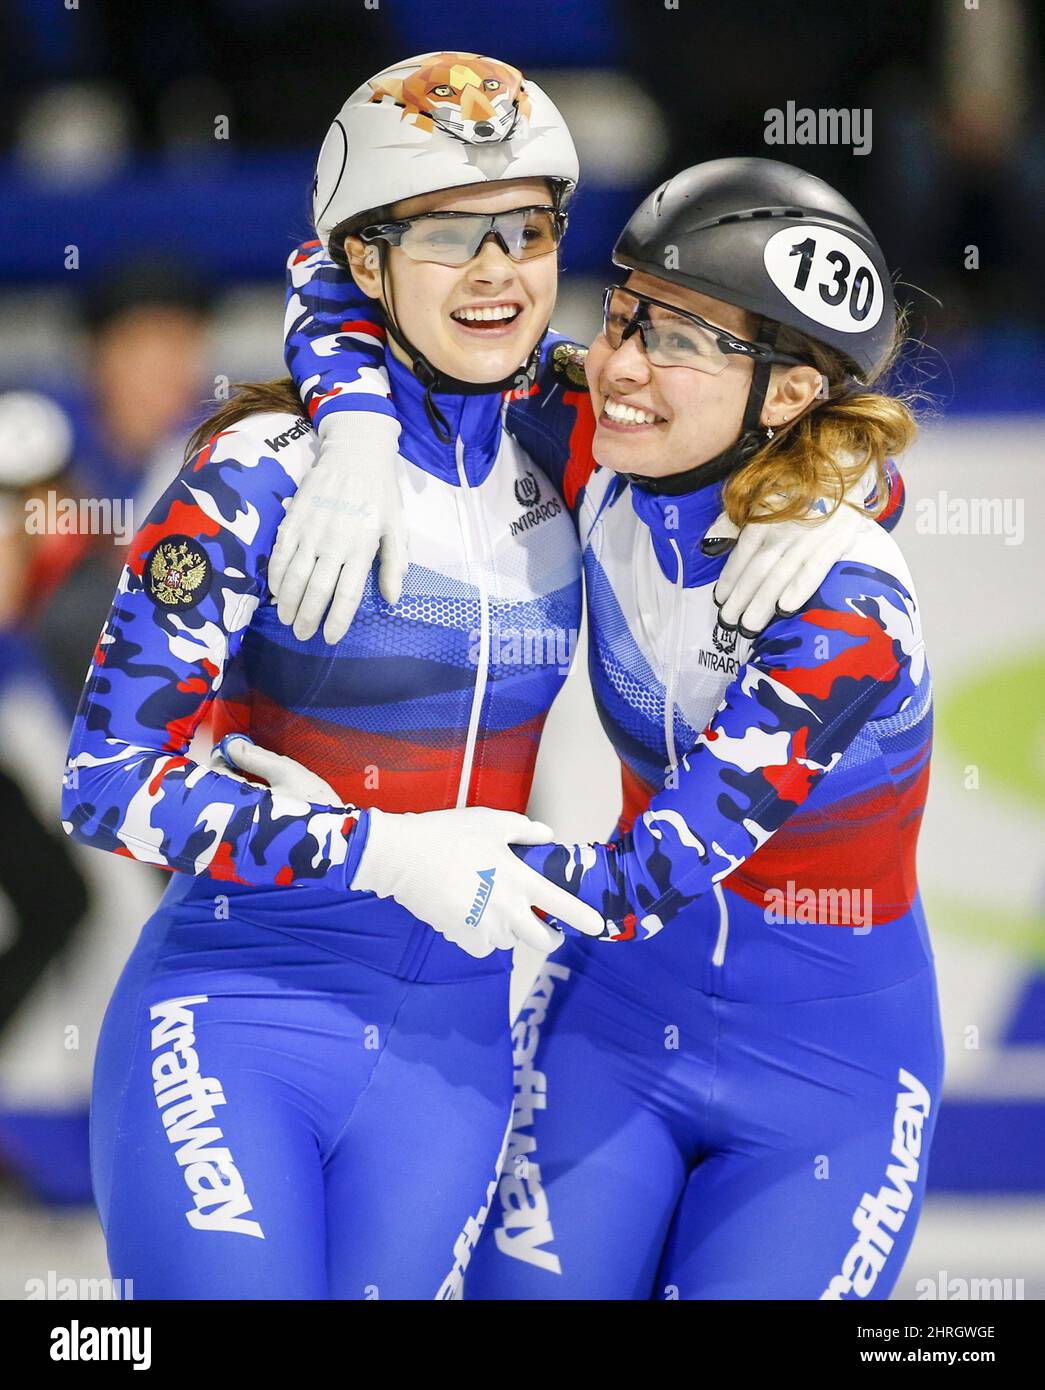 Russia's Sofia Prosvirnova, left, and teammate Emina Malagich celebrate their team winning the women's 3000-metre relay finals at the ISU World Cup short track speed skating event in Calgary, Sunday, Nov. 4, 2018. THE CANADIAN PRESS/Jeff McIntosh Stock Photo